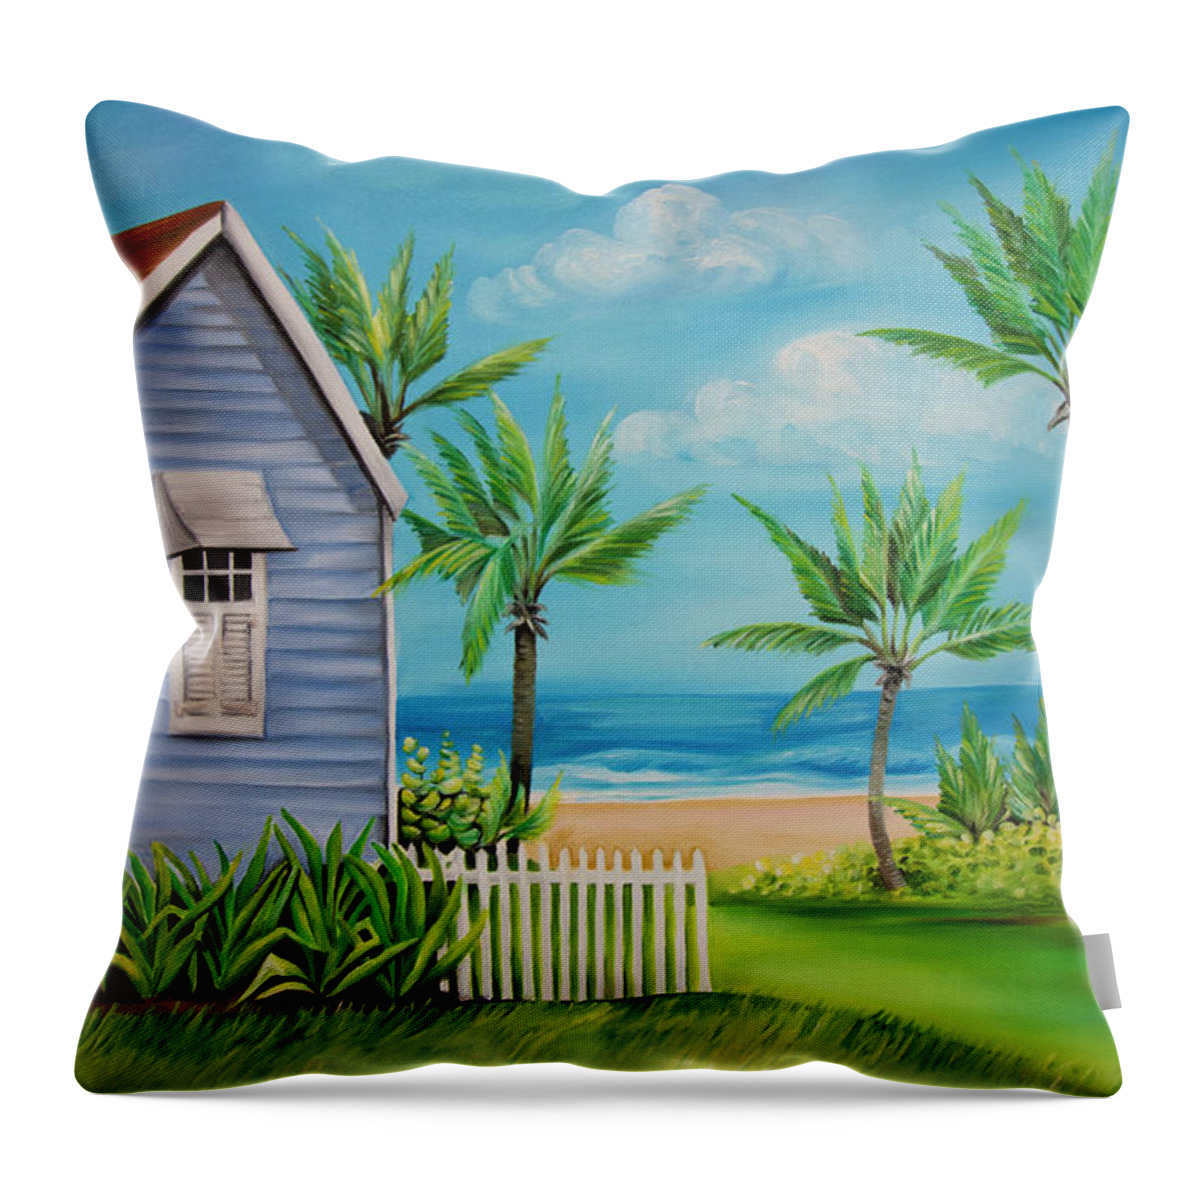 Barbados Throw Pillow featuring the painting Barbados Beach House by Barbara Noel